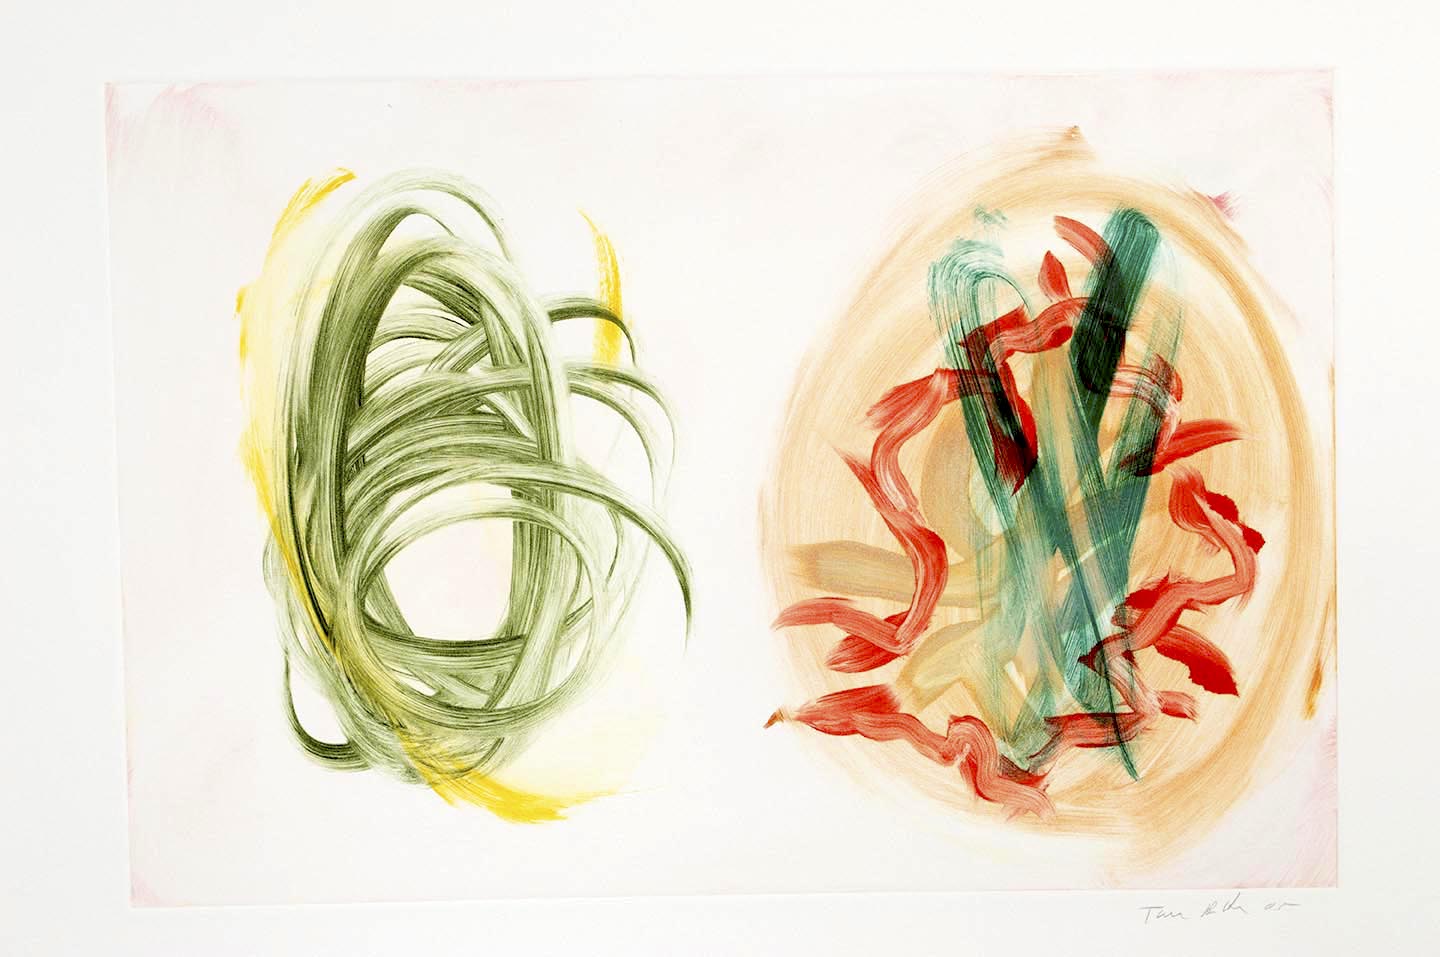  oil on Arches acid free rag paper, 26 x 30 inches (66 x 76.2 cm), signed and dated 2005 